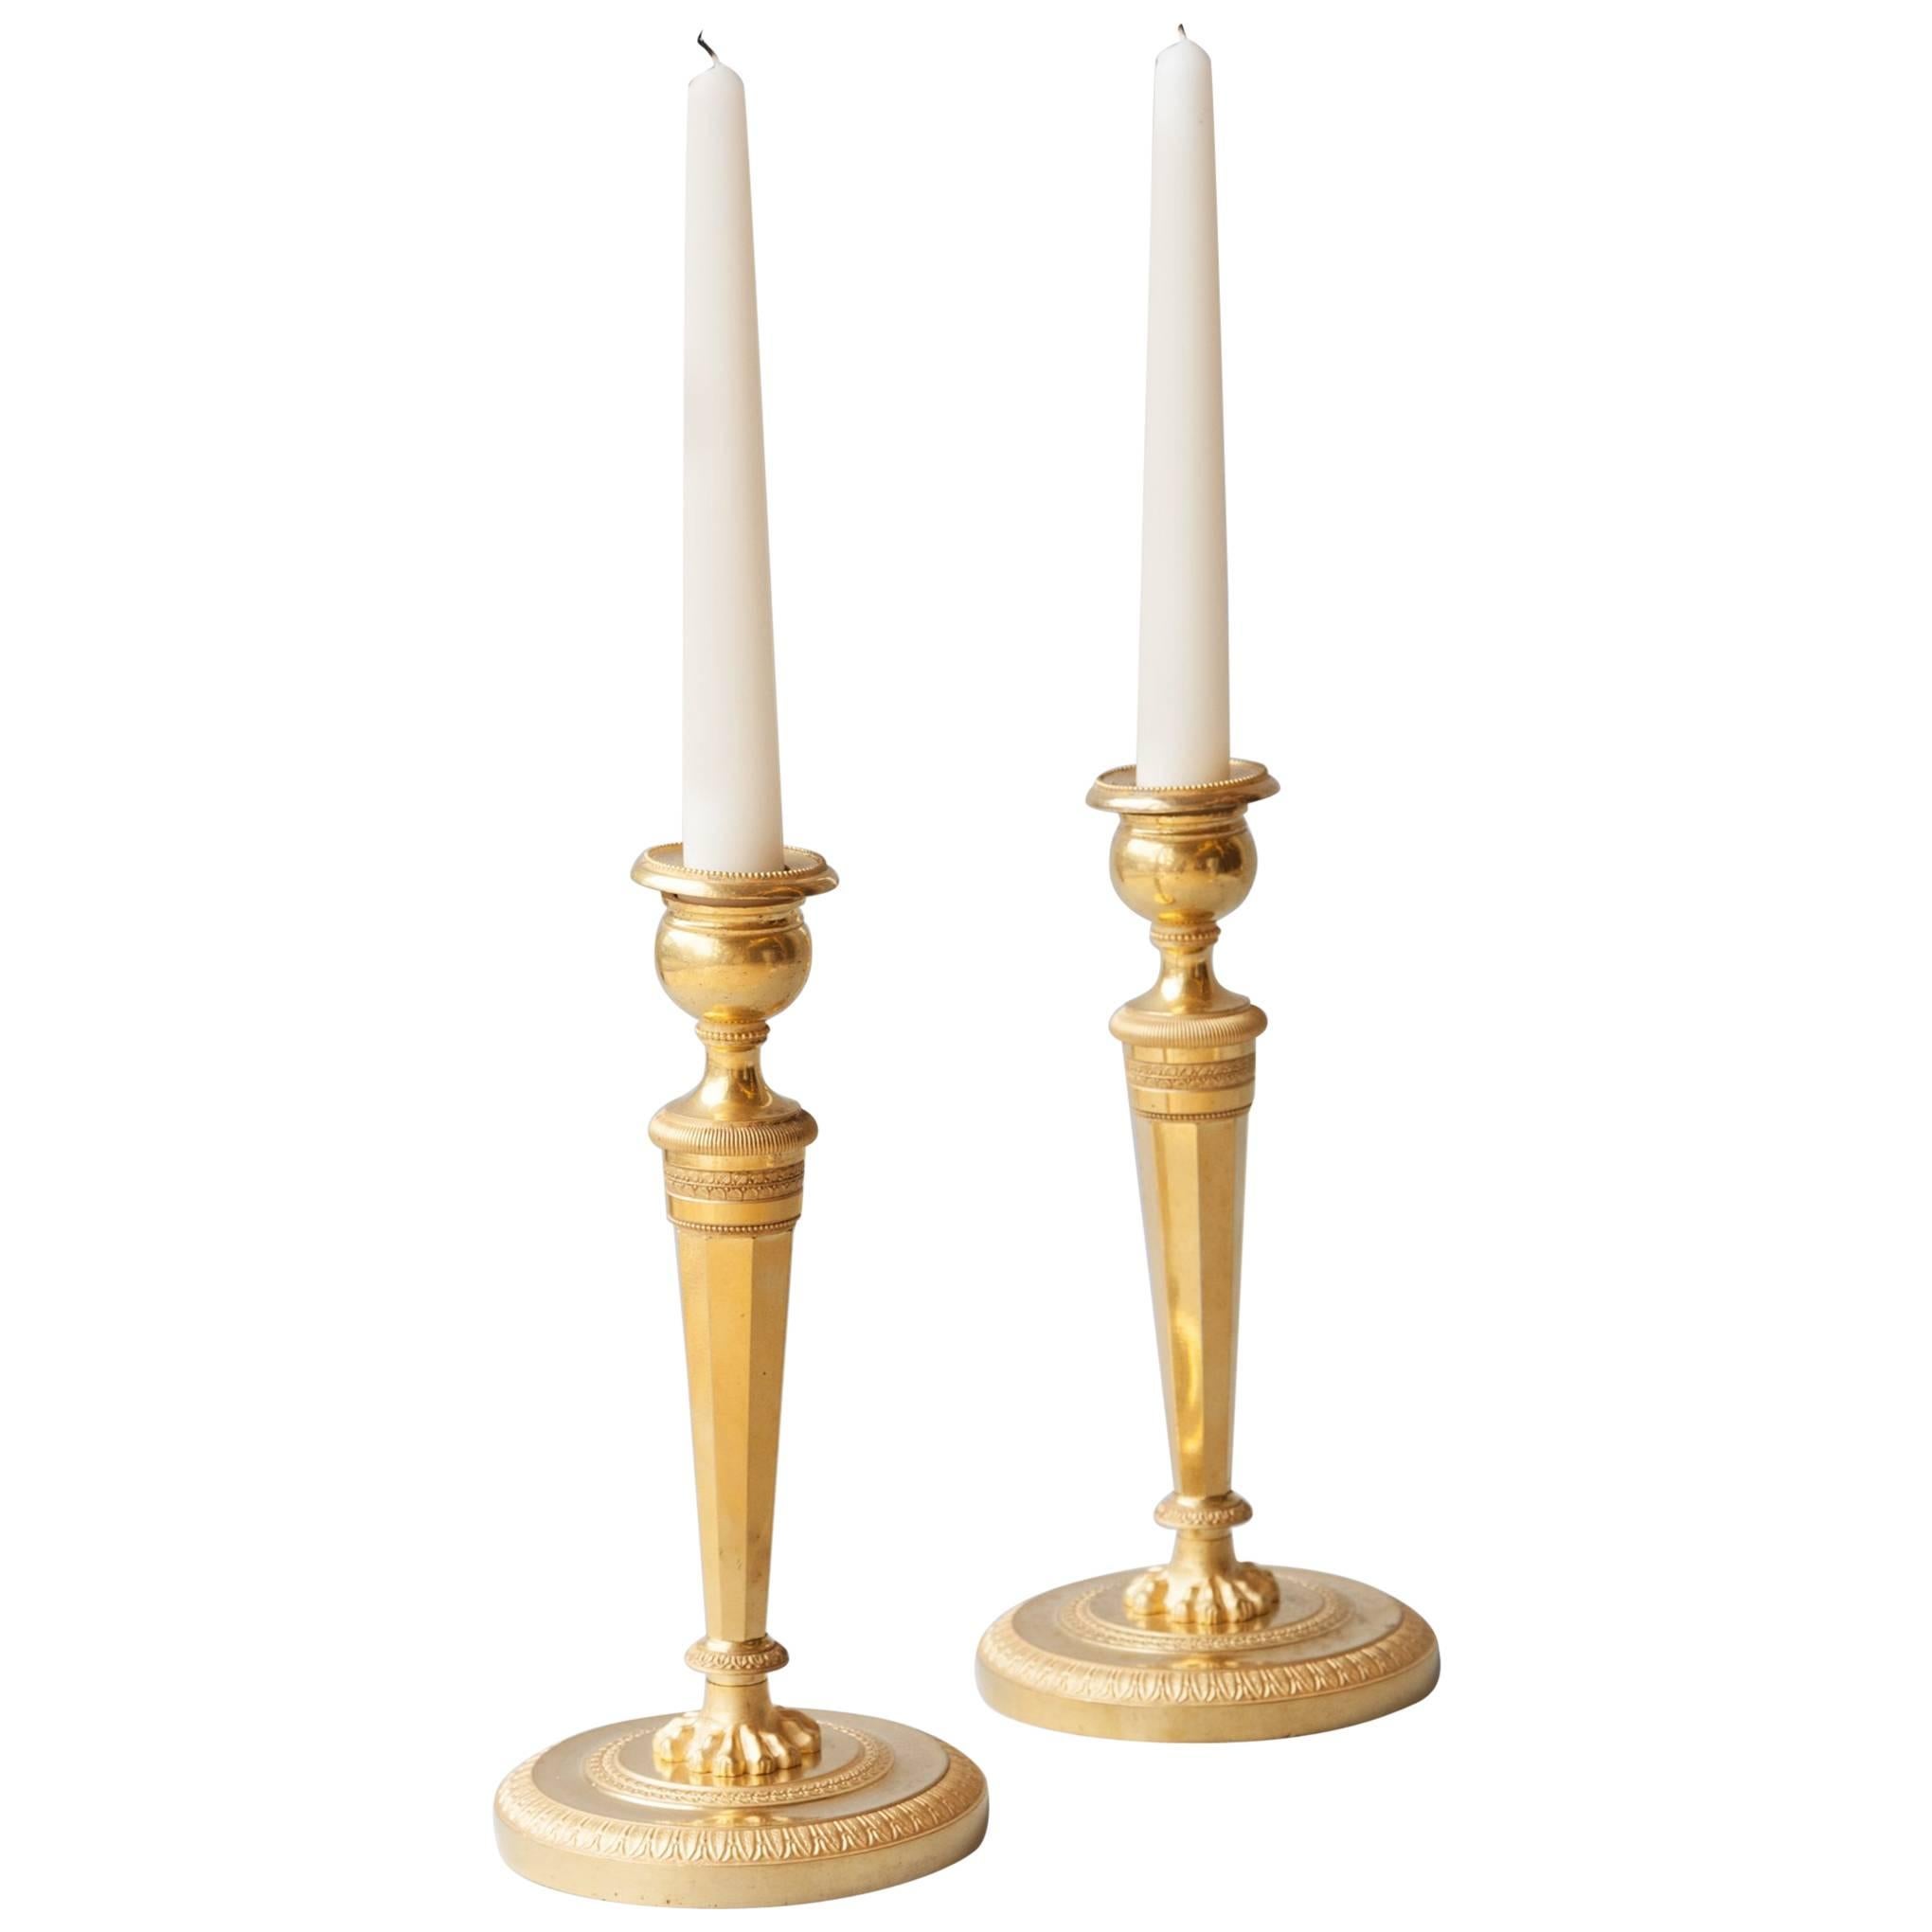 Pair of Fine Quality Early 19th Century Gilt Bronze Candlesticks For Sale